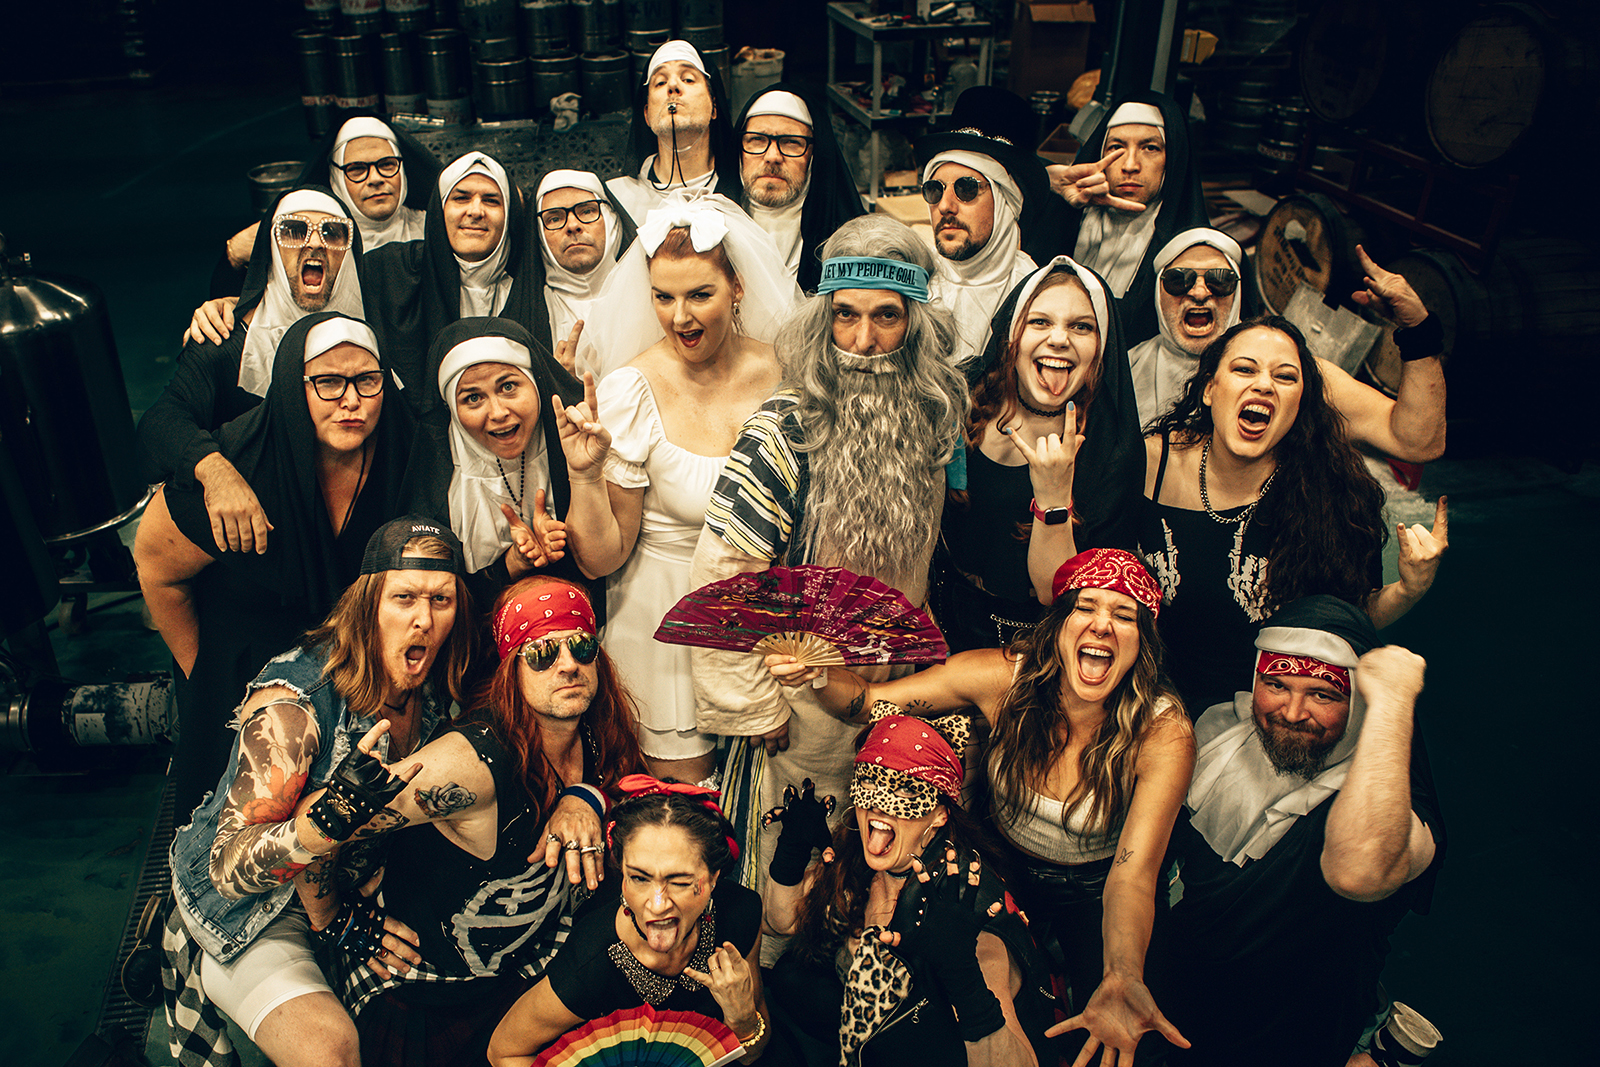 Stephen Mason, center, dressed Soccer Moses, poses with fellow performers from a “Nuns N' Moses” fundraiser, Aug. 25, 2023, at Yazoo Brewery in Nashville, Tenn. Photo by Anthony Matula